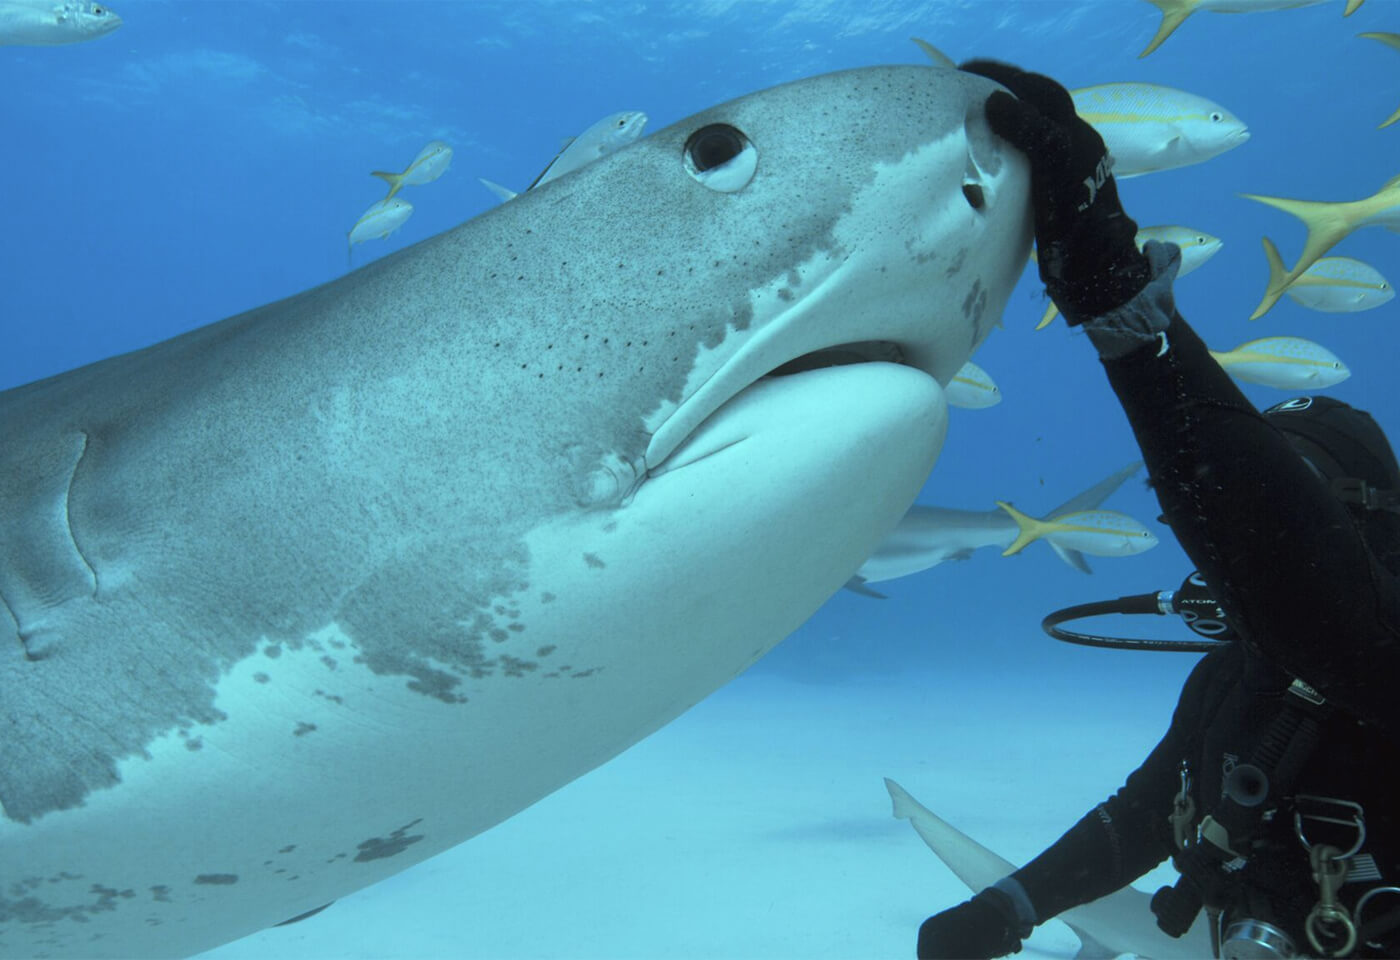 Takes by light image of diver patting a shark